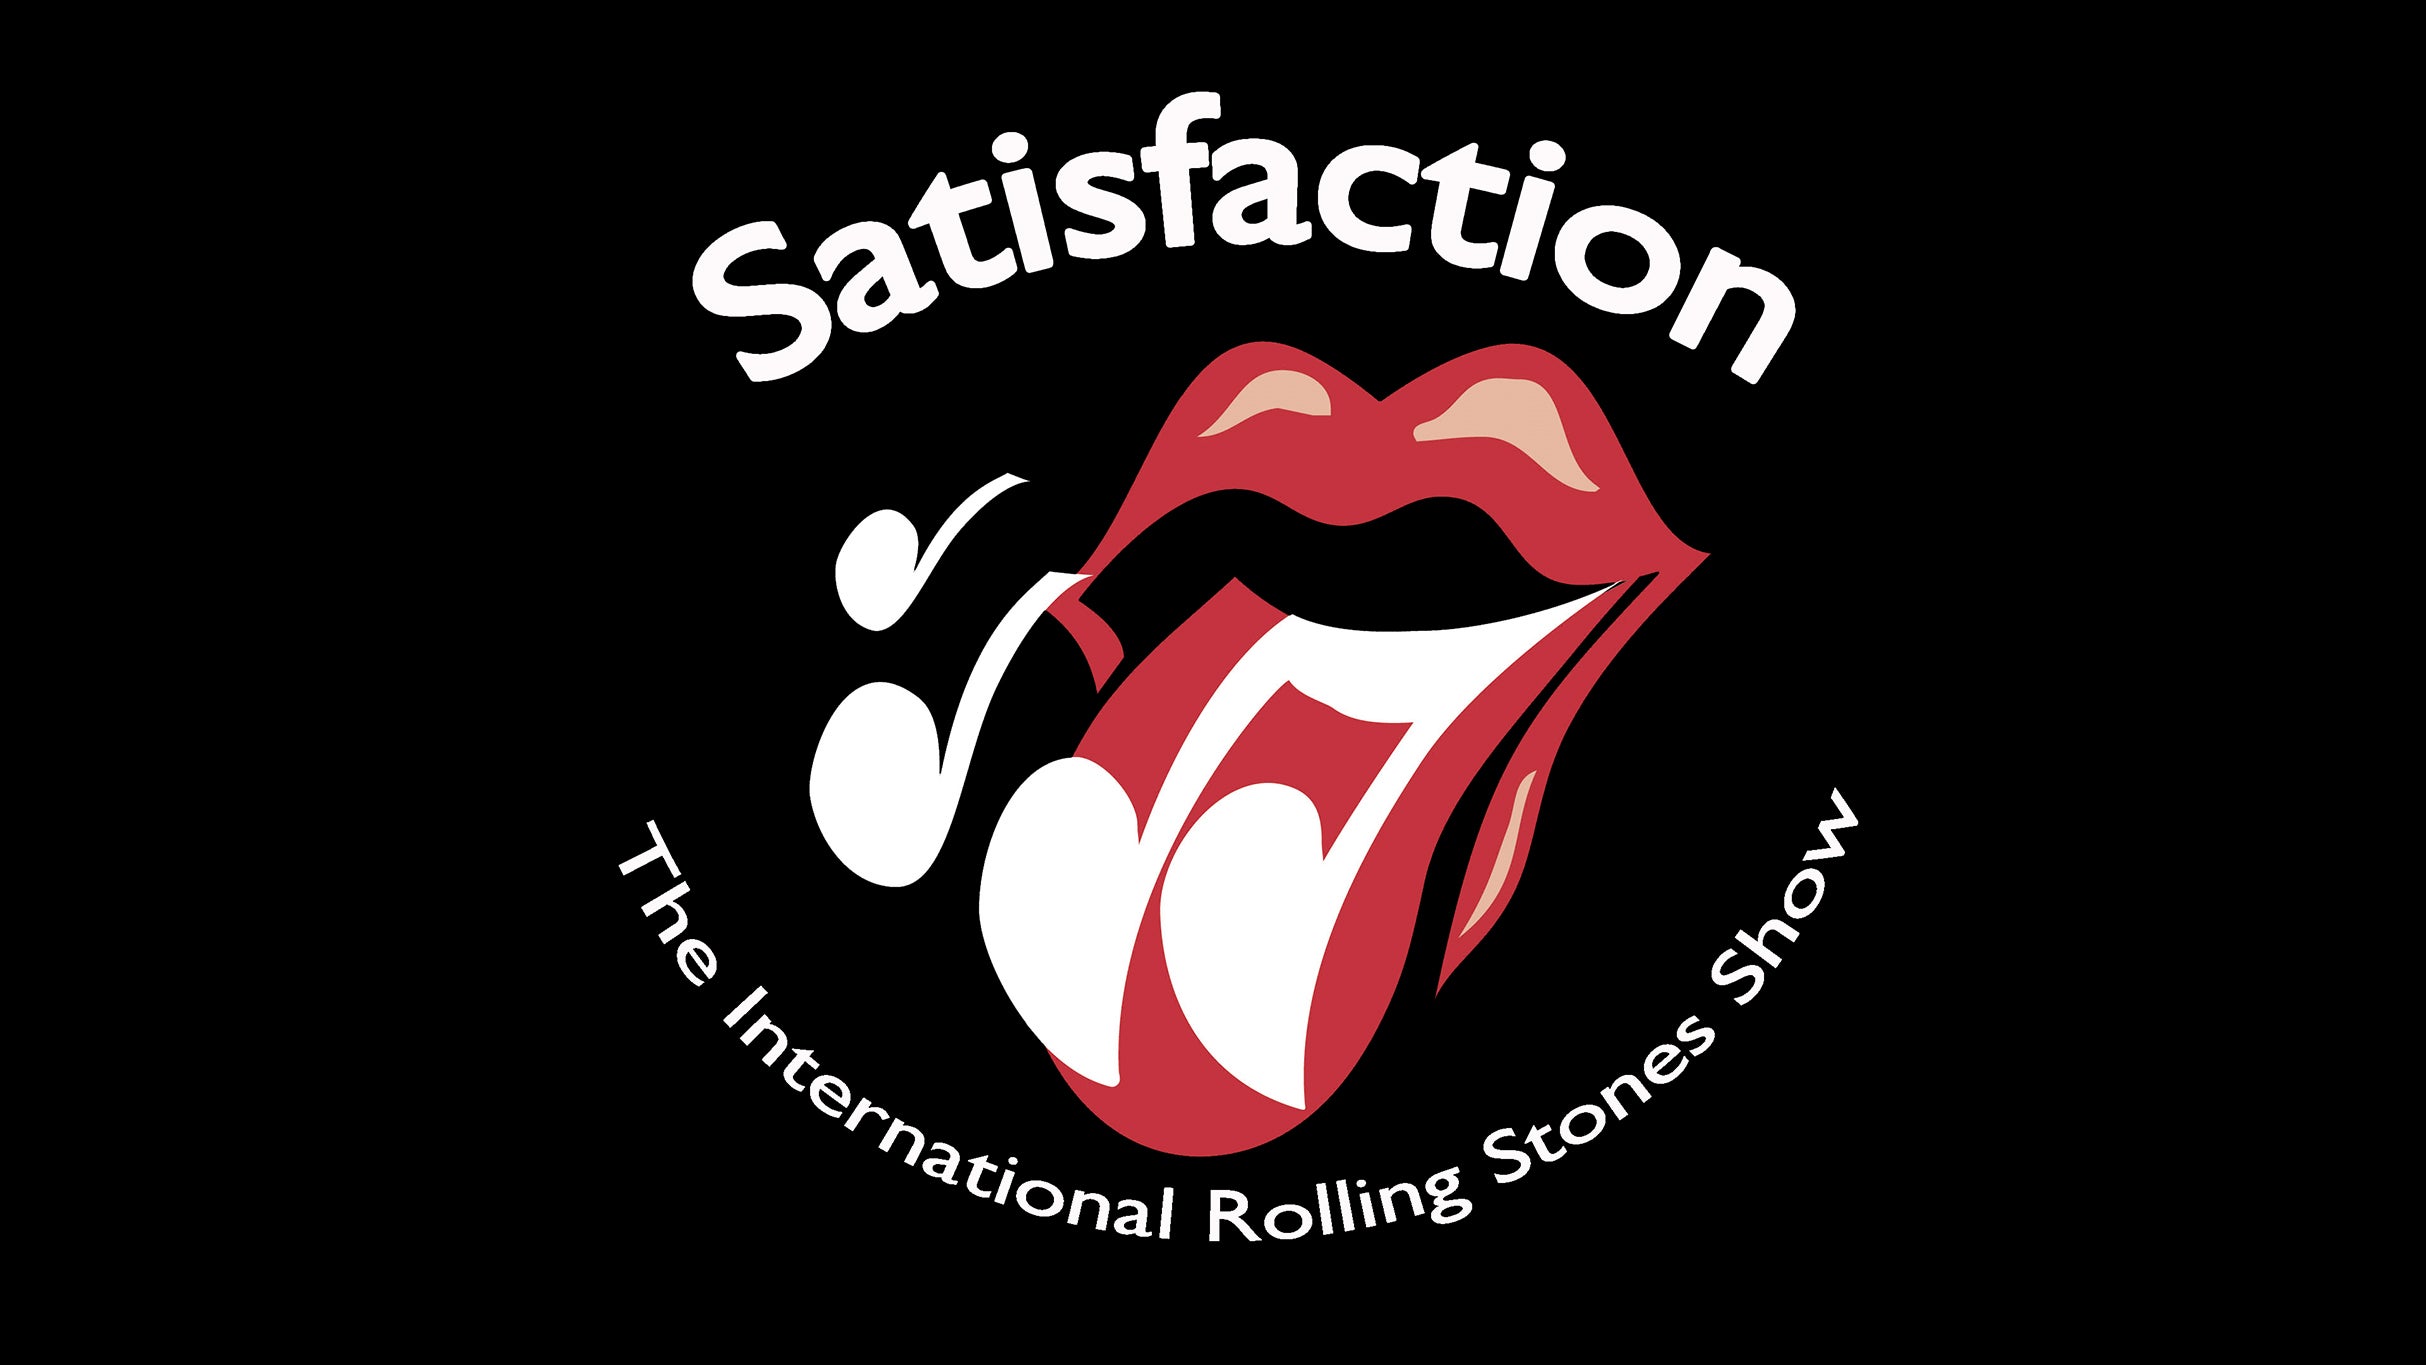 Satisfaction - International Rolling Stones Tribute Show free presale code for concert tickets in Portland, ME (Aura)